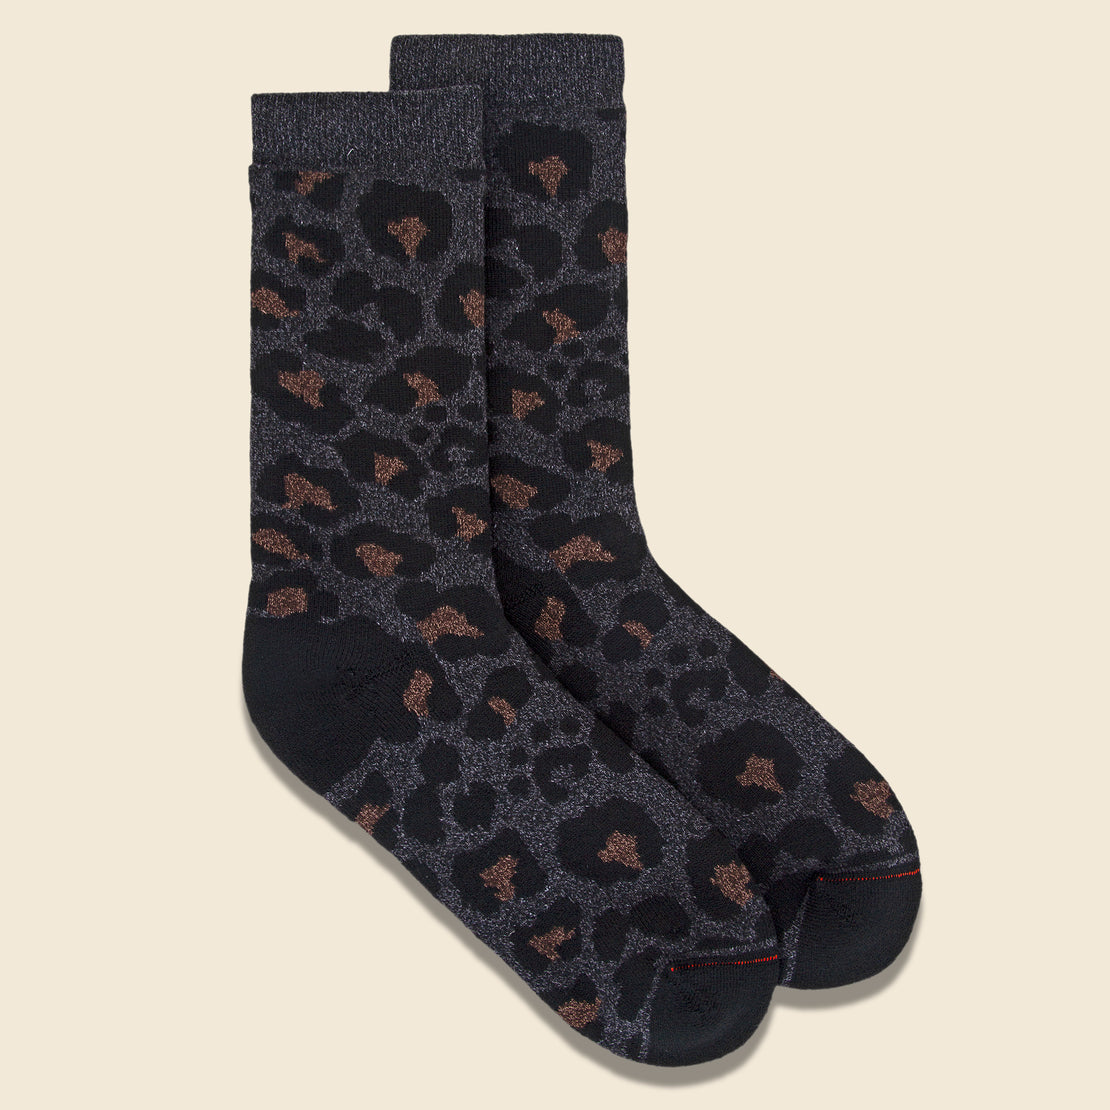 Pile Leopard Socks - Charcoal - RoToTo - STAG Provisions - W - Accessories - Socks